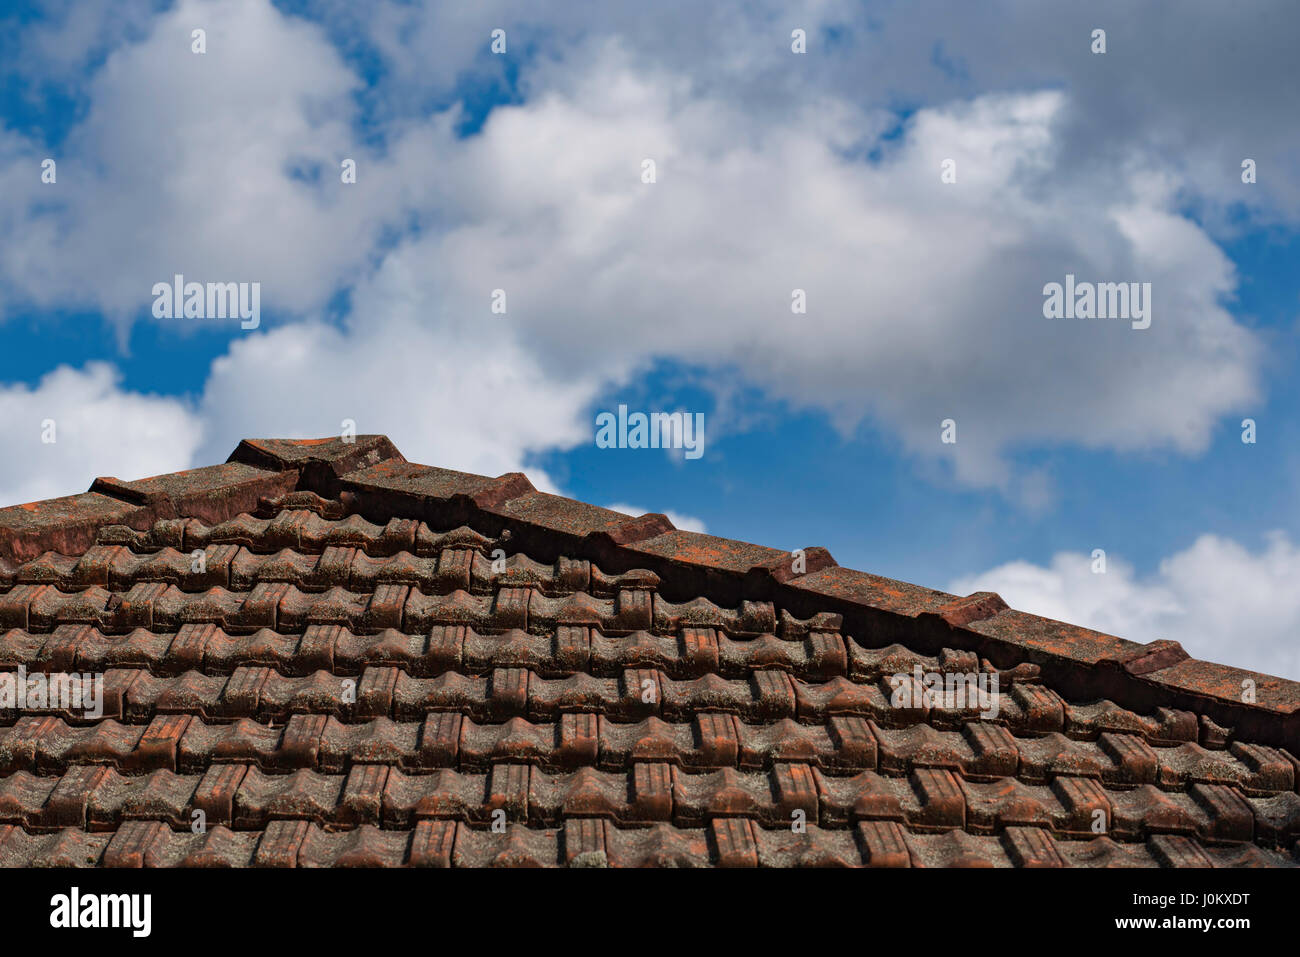 A terracotta tiled roof on a California Bungalow house in Sydney, Australia Stock Photo